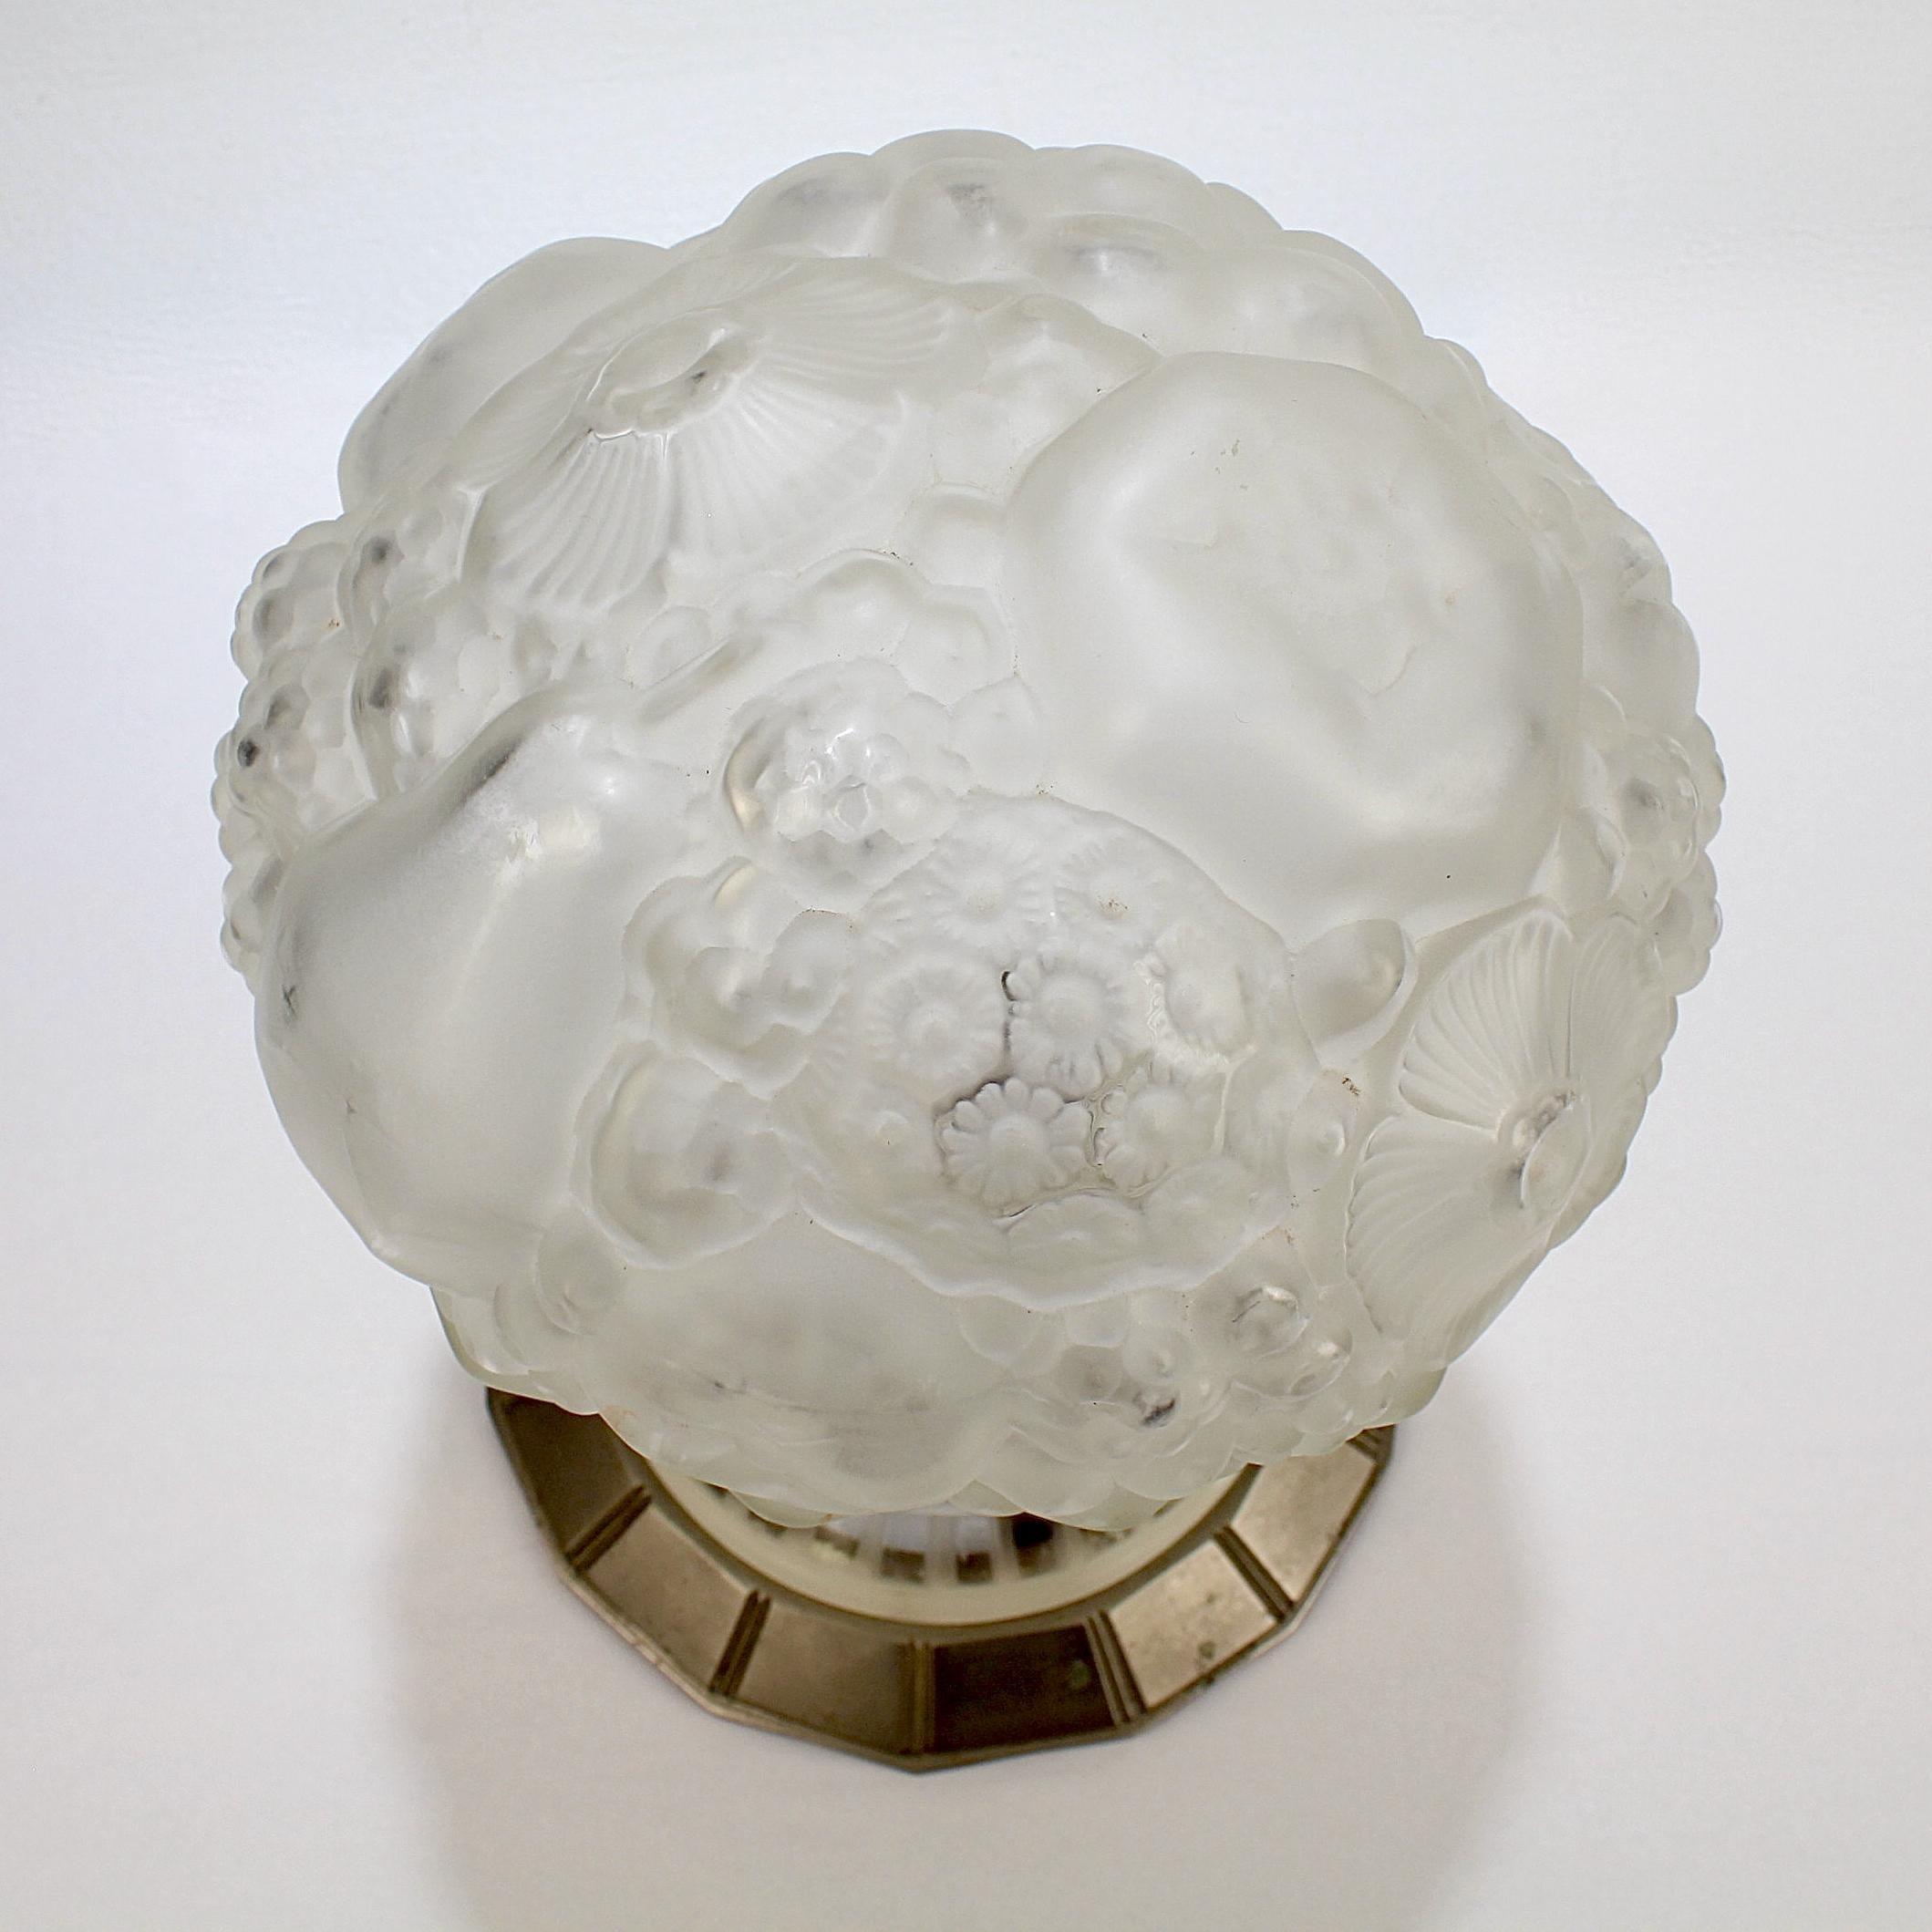 Rare Genet et Michon French Art Deco Frosted Art Glass Table Lamp Shade In Good Condition For Sale In Philadelphia, PA